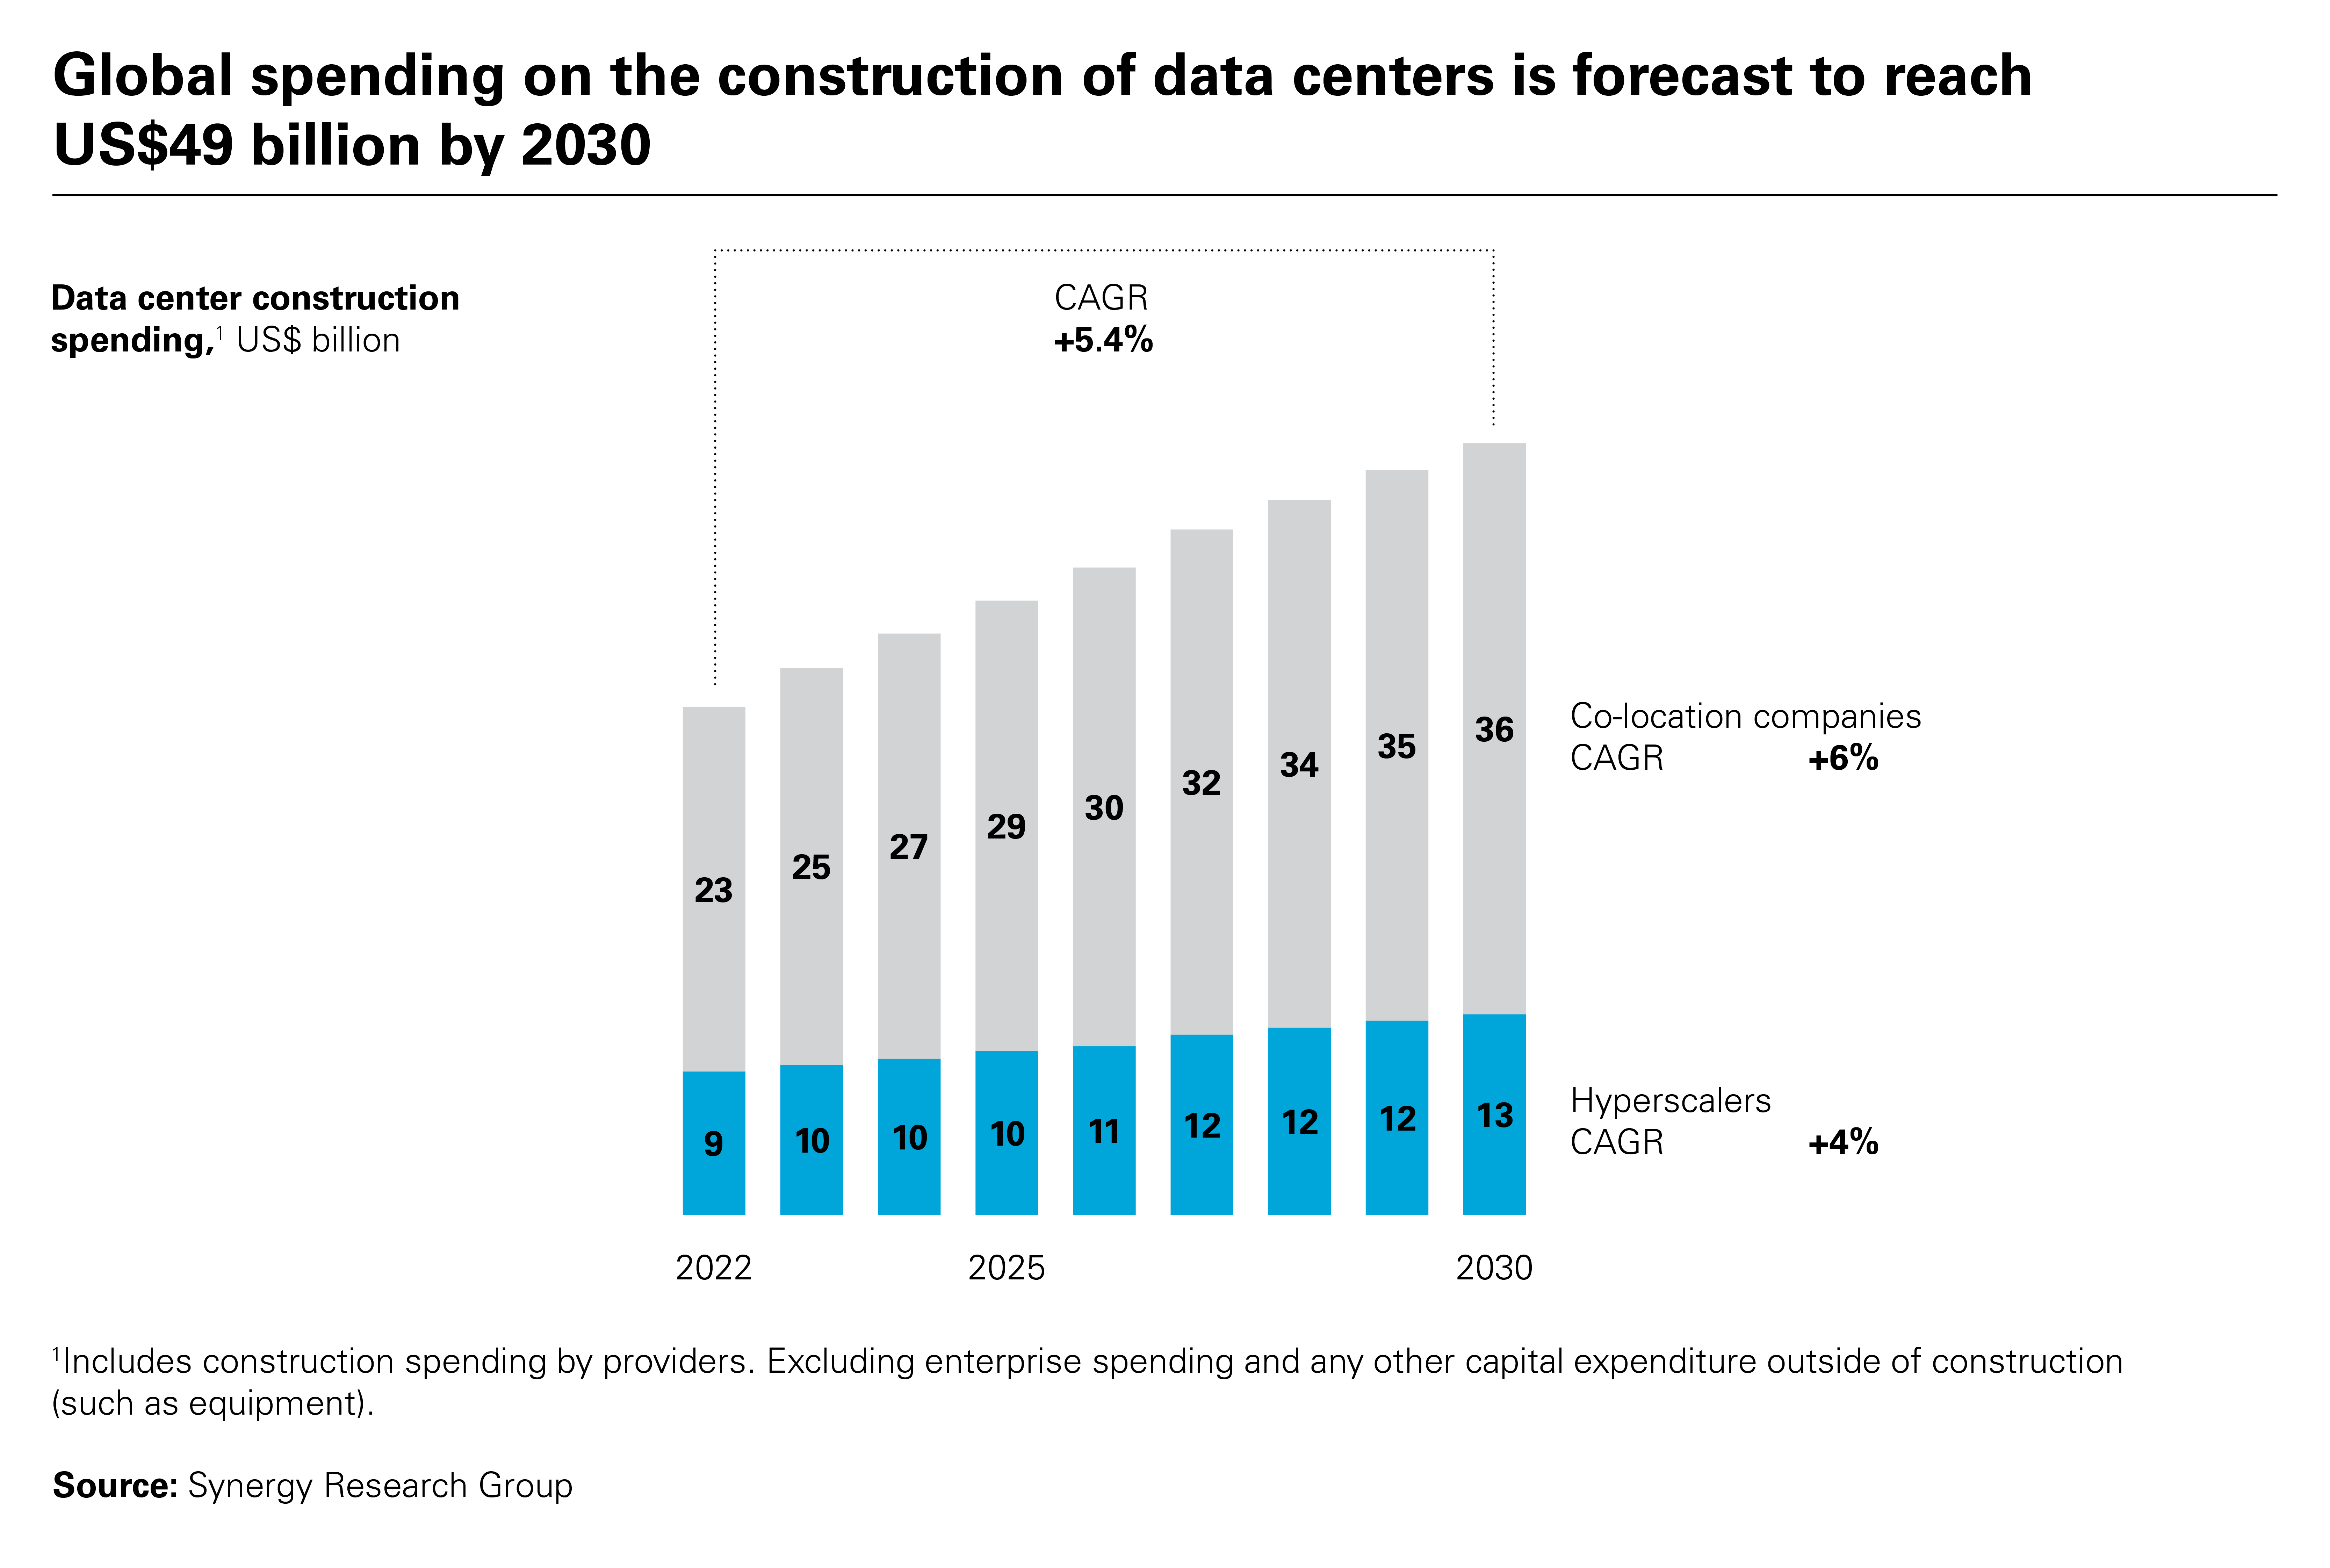 Global spending on the construction of data centers is forecast to reach US$49 billion by 2030